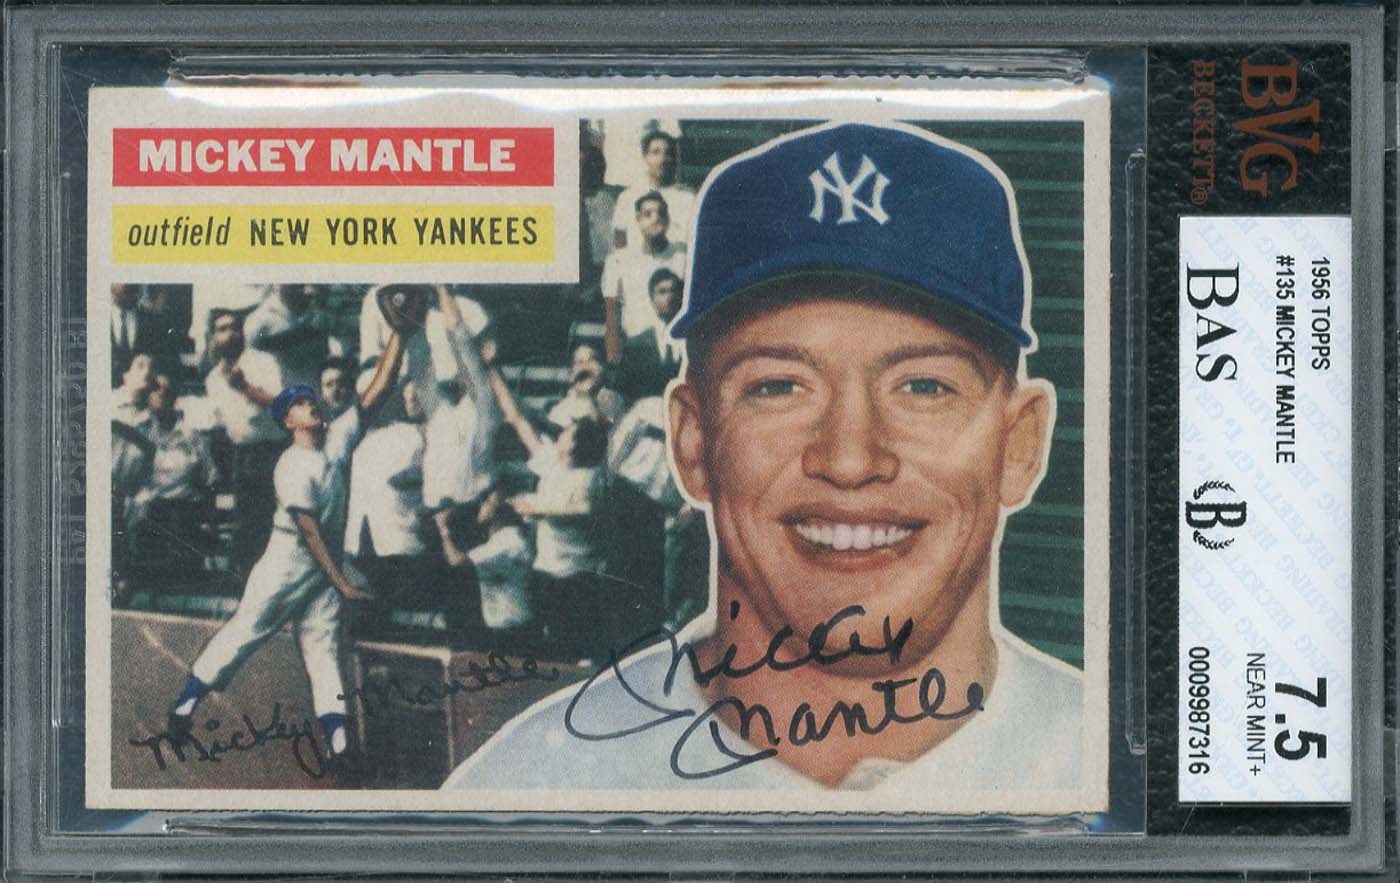 - 1956 Topps #135 Mickey Mantle Signed Card - Beckett/BAS 7.5/10